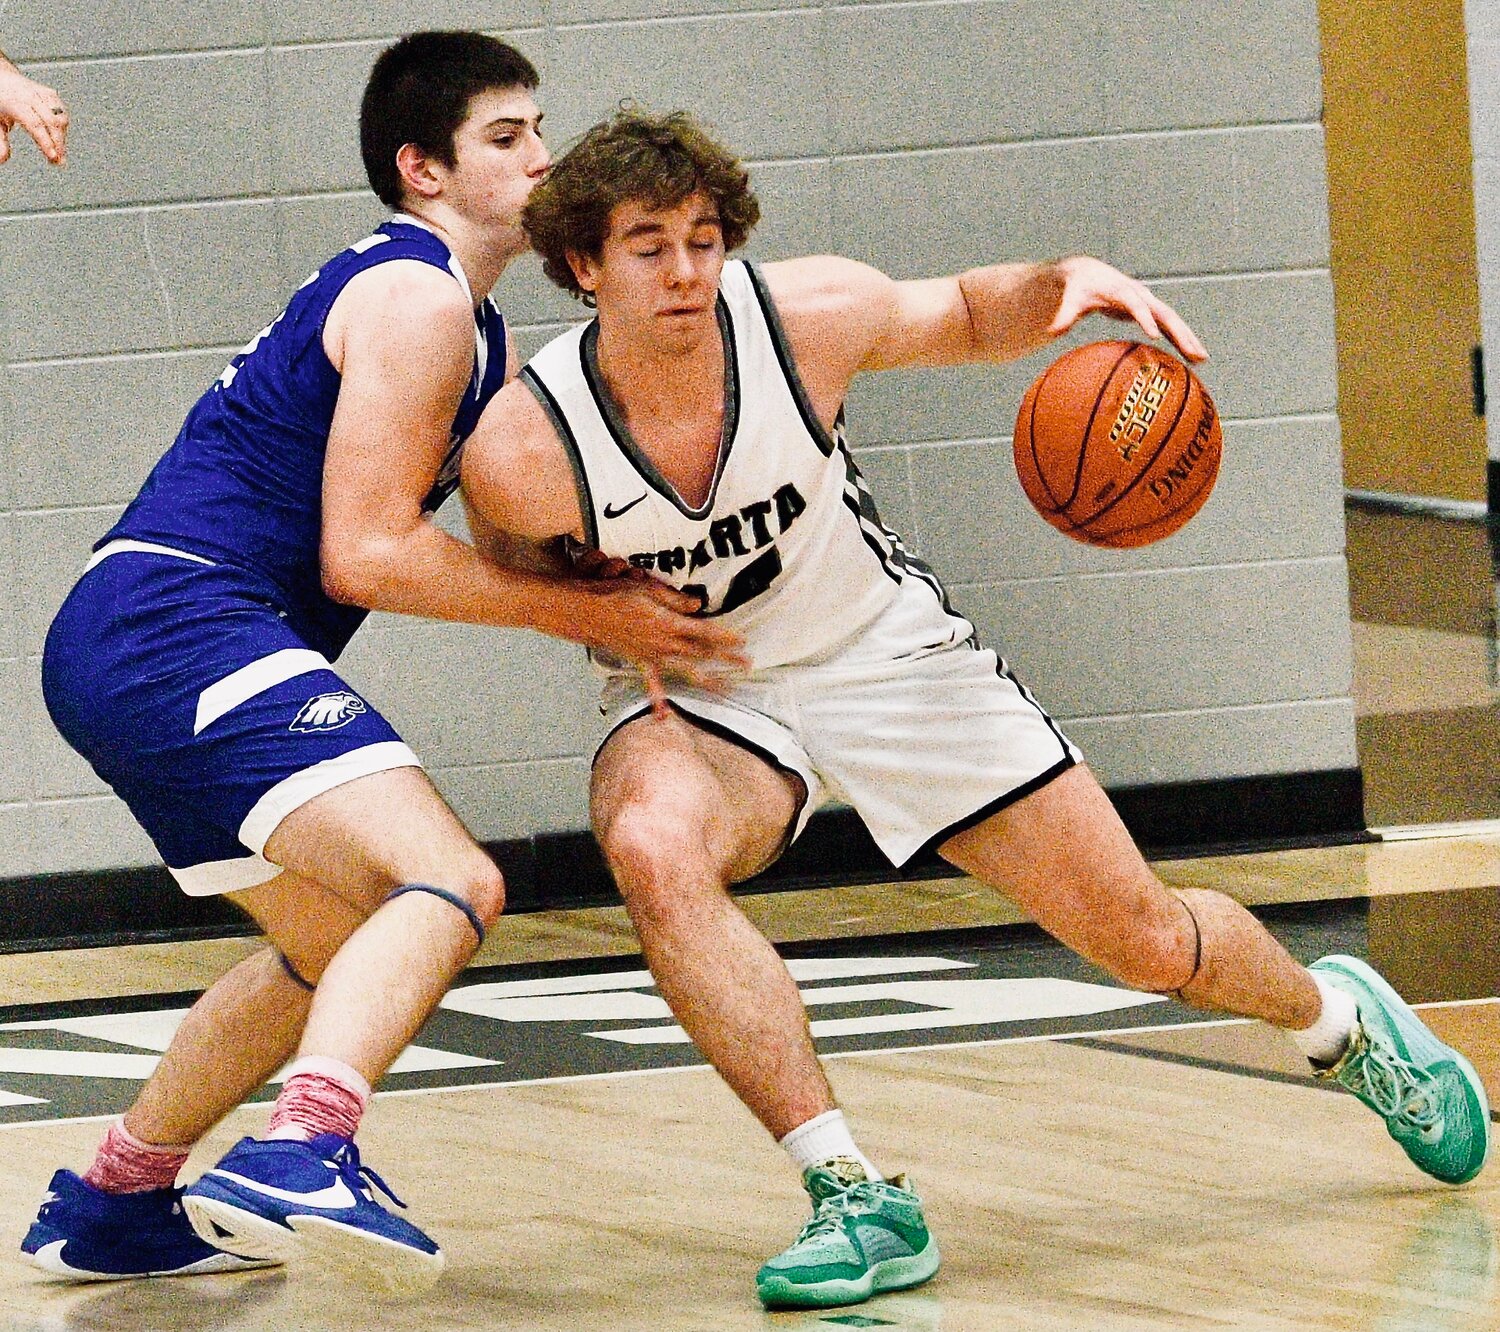 SPARTA'S JAKE LAFFERTY looks for room around a defender.